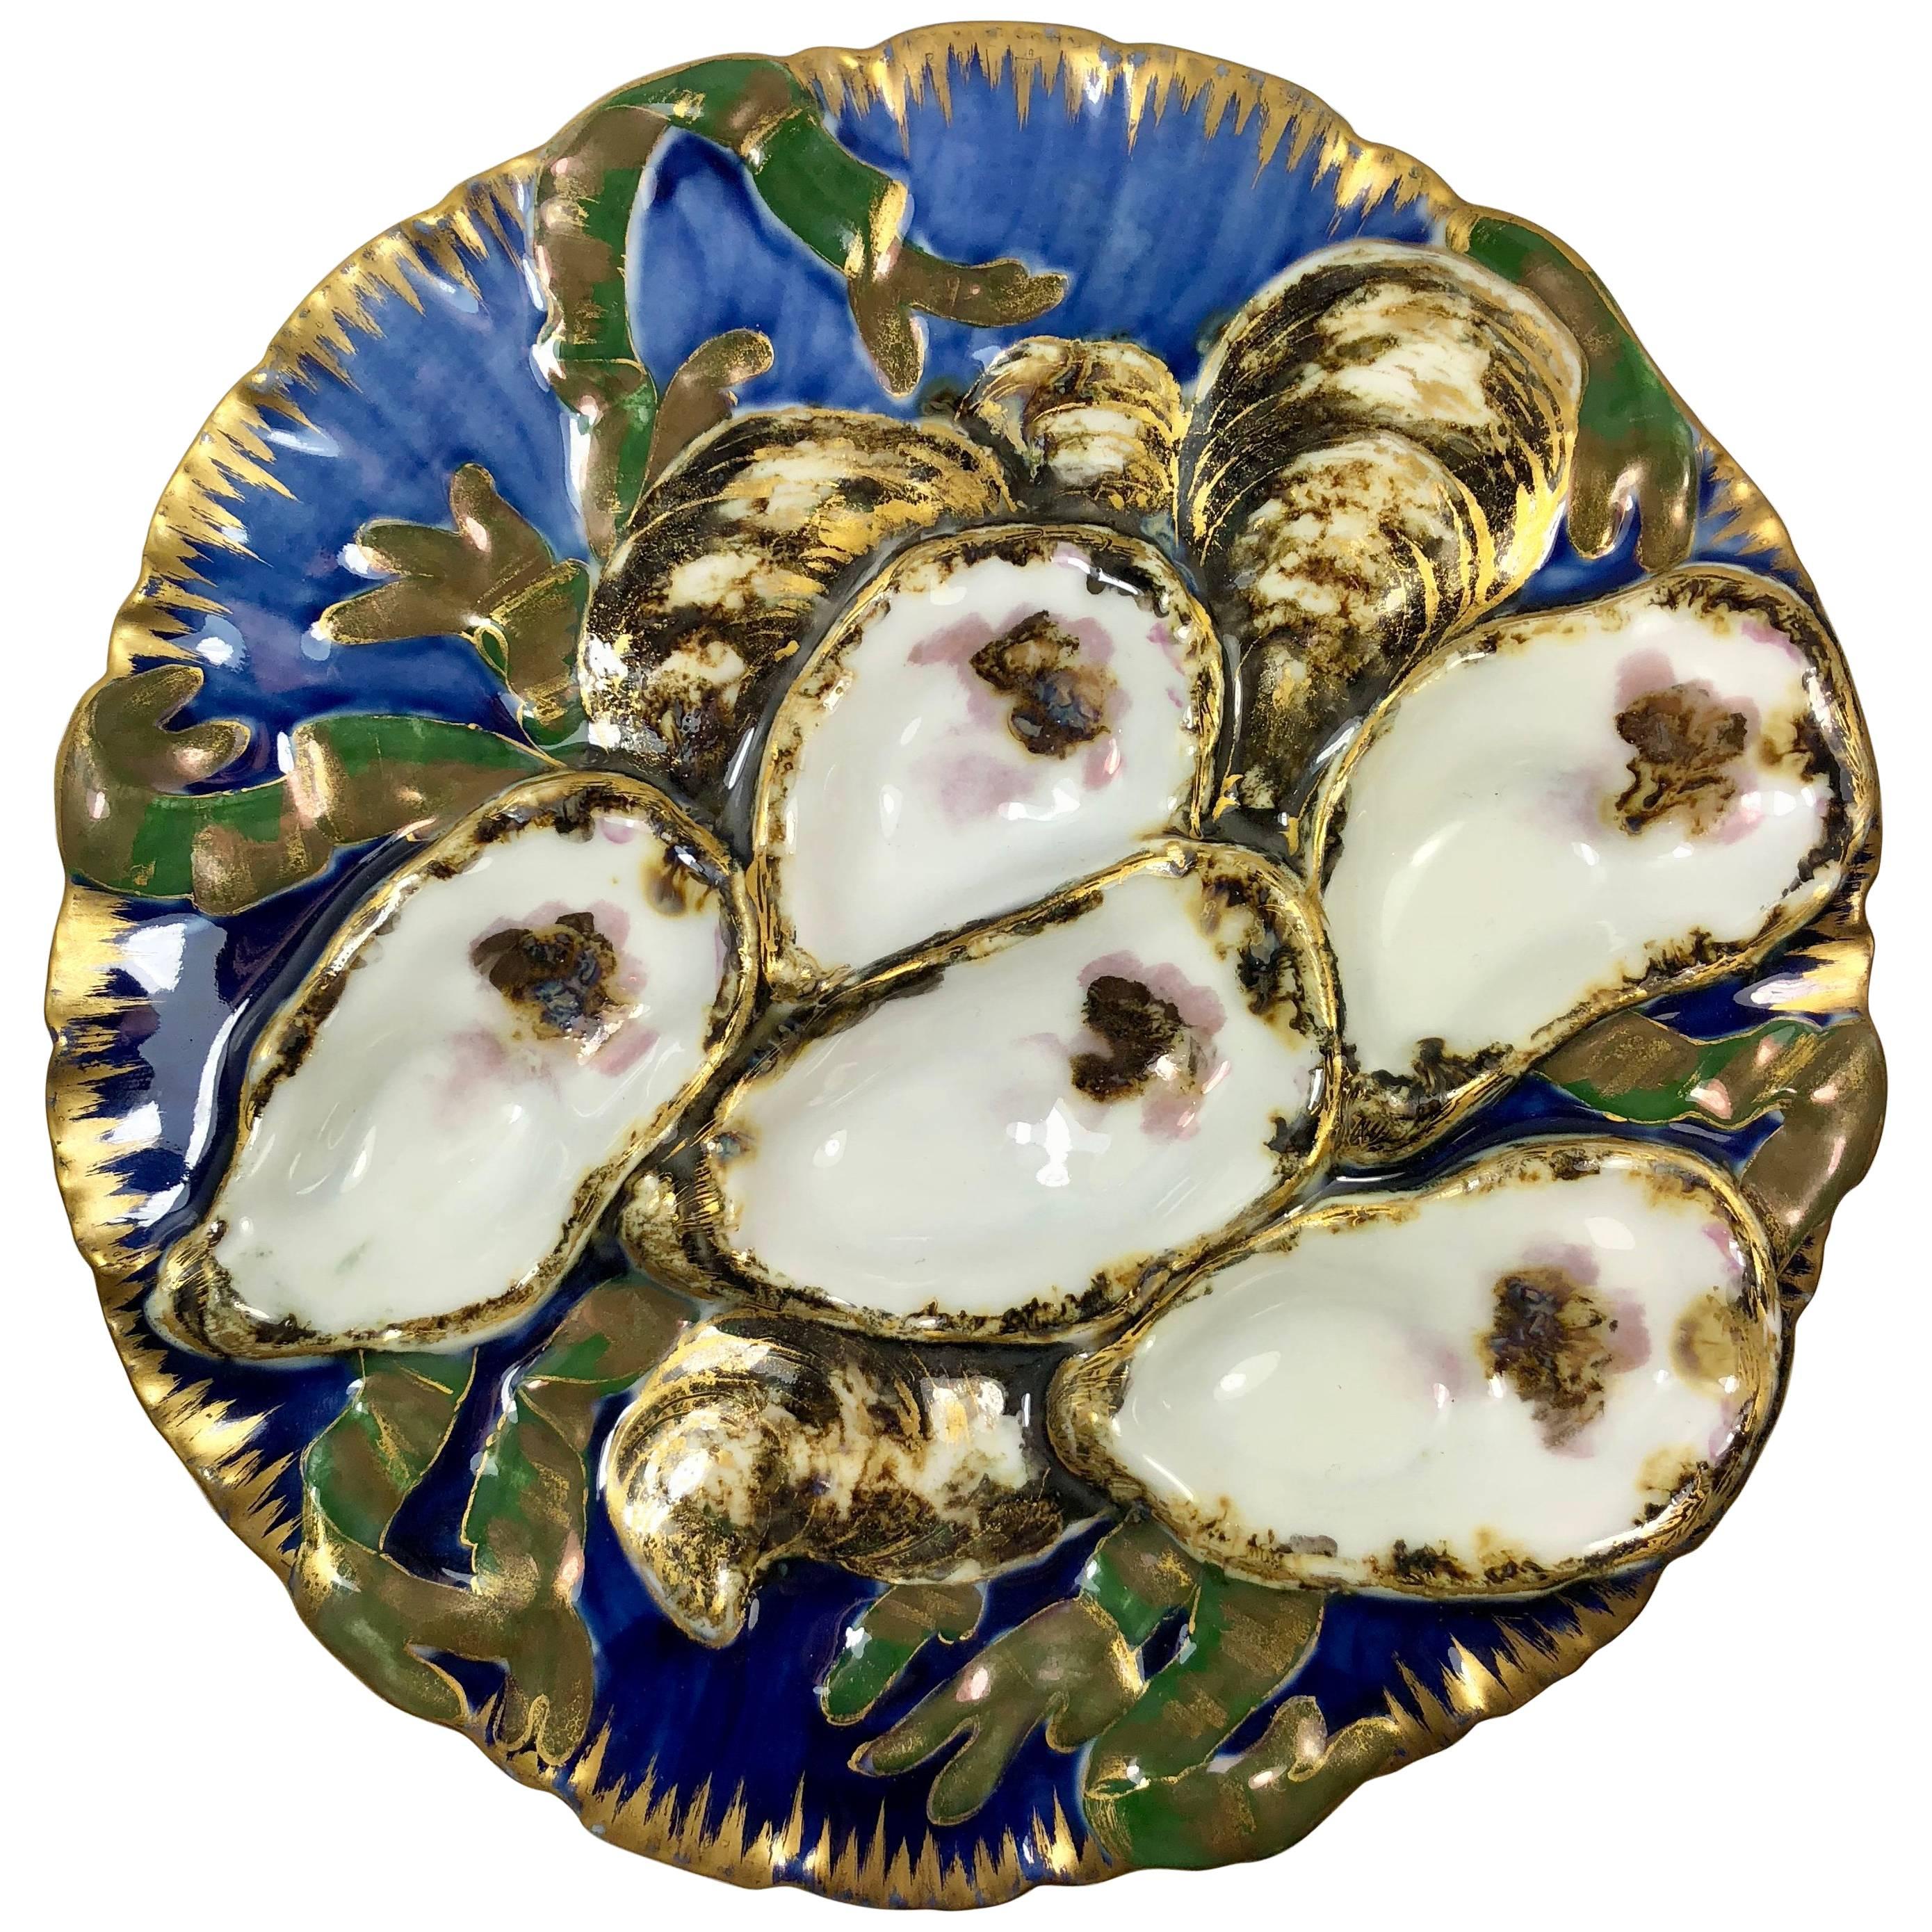 Presidential Oyster Plate